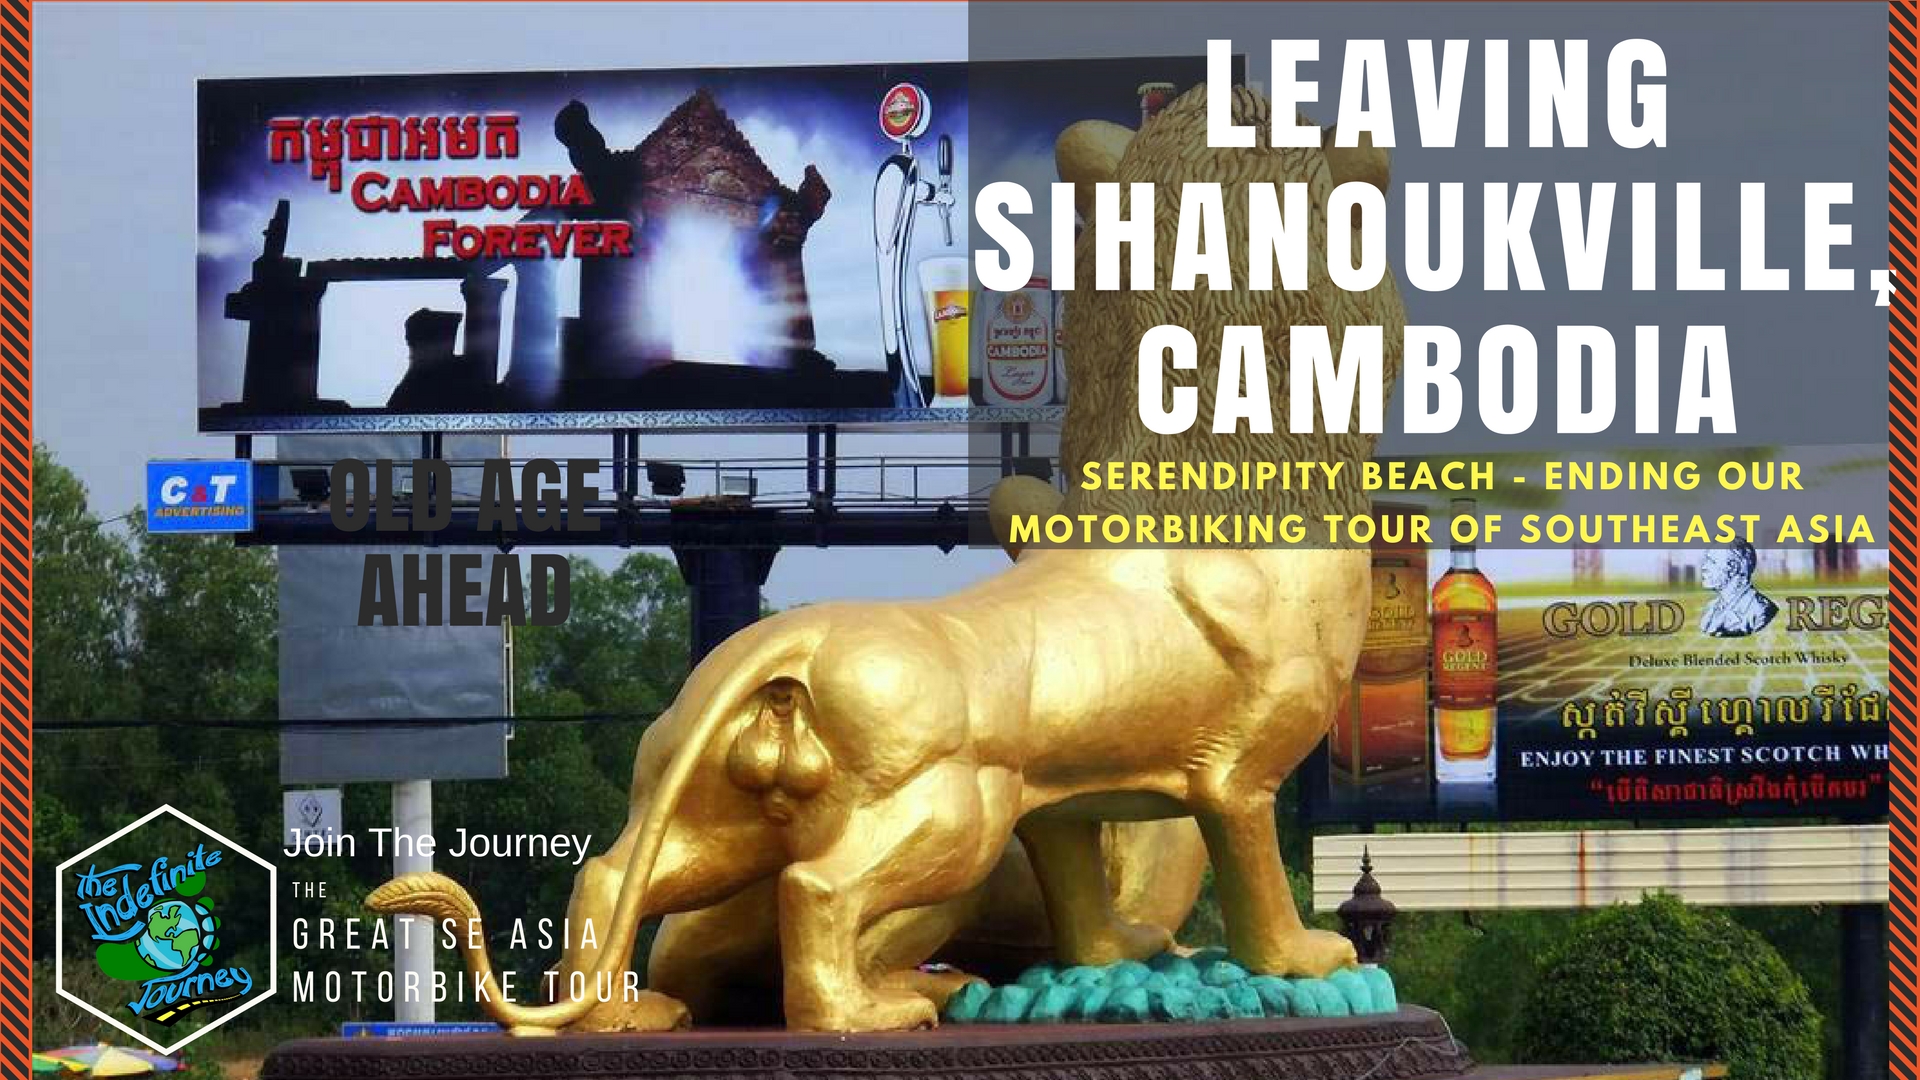 Leaving Sihanoukville, Cambodia and Serendipity Beach - Ending Our Motorbiking Tour of Southeast Asia